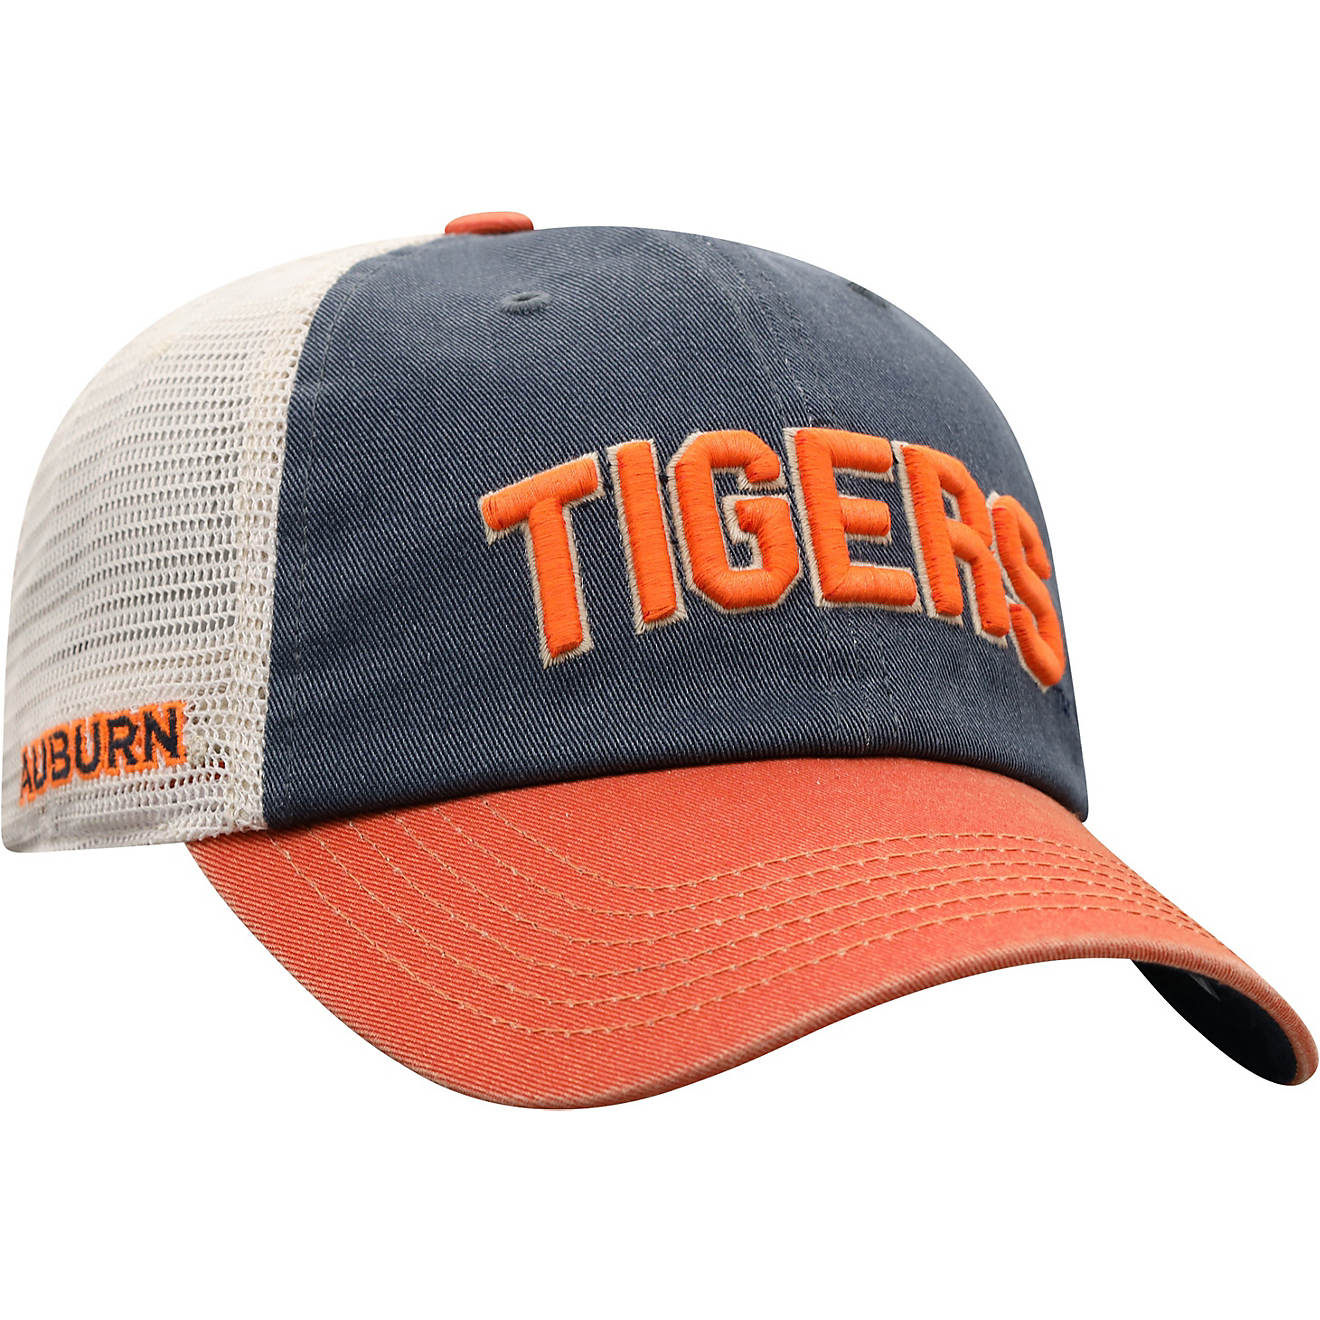 Top of the World Men's Auburn University Andy 3-Tone Cap                                                                         - view number 1